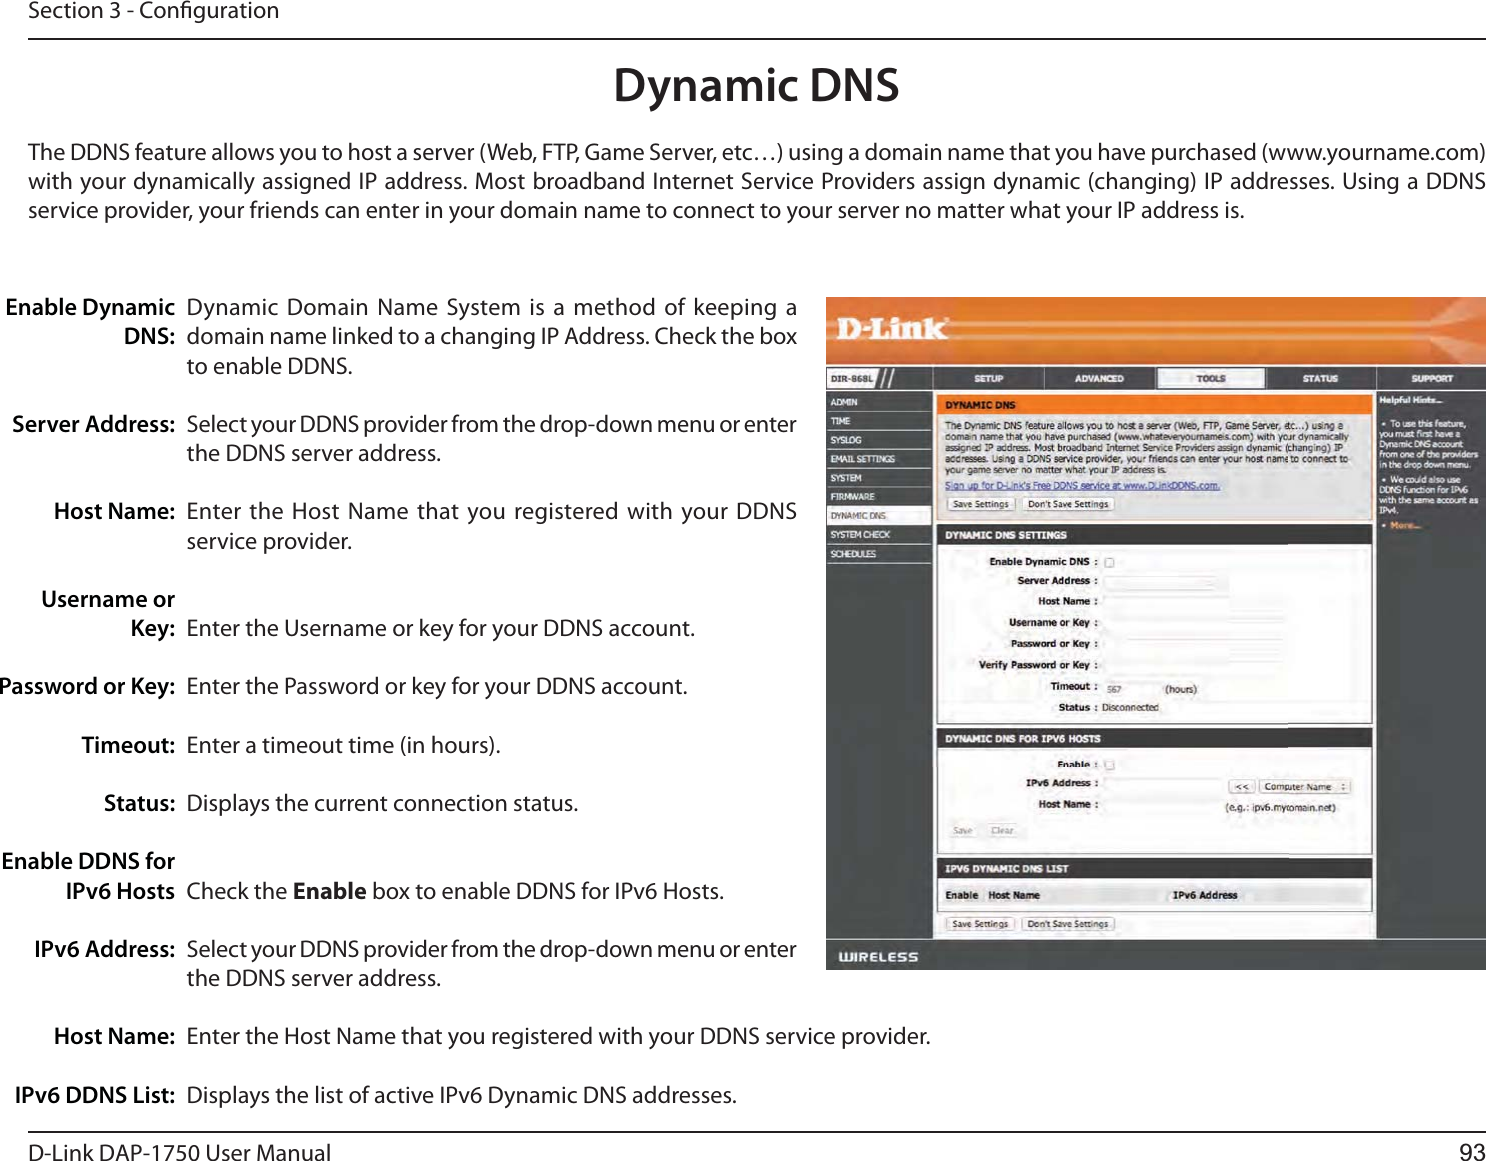 D-Link %&quot;1 User ManualSection 3 - CongurationDynamic Domain Name System is a method of keeping a domain name linked to a changing IP Address. Check the box to enable DDNS.Select your DDNS provider from the drop-down menu or enter the DDNS server address.Enter the Host Name that you registered with your DDNS service provider.Enter the Username or key for your DDNS account.Enter the Password or key for your DDNS account.Enter a timeout time (in hours).Displays the current connection status.Check the Enable box to enable DDNS for IPv6 Hosts.Select your DDNS provider from the drop-down menu or enter the DDNS server address.Enter the Host Name that you registered with your DDNS service provider.Displays the list of active IPv6 Dynamic DNS addresses.Enable Dynamic DNS:Server Address:Host Name:Username or Key:Password or Key:Timeout:Status:Enable DDNS for IPv6 HostsIPv6 Address:Host Name:IPv6 DDNS List:Dynamic DNSThe DDNS feature allows you to host a server (Web, FTP, Game Server, etc…) using a domain name that you have purchased (www.yourname.com) with your dynamically assigned IP address. Most broadband Internet Service Providers assign dynamic (changing) IP addresses. Using a DDNS service provider, your friends can enter in your domain name to connect to your server no matter what your IP address is.93